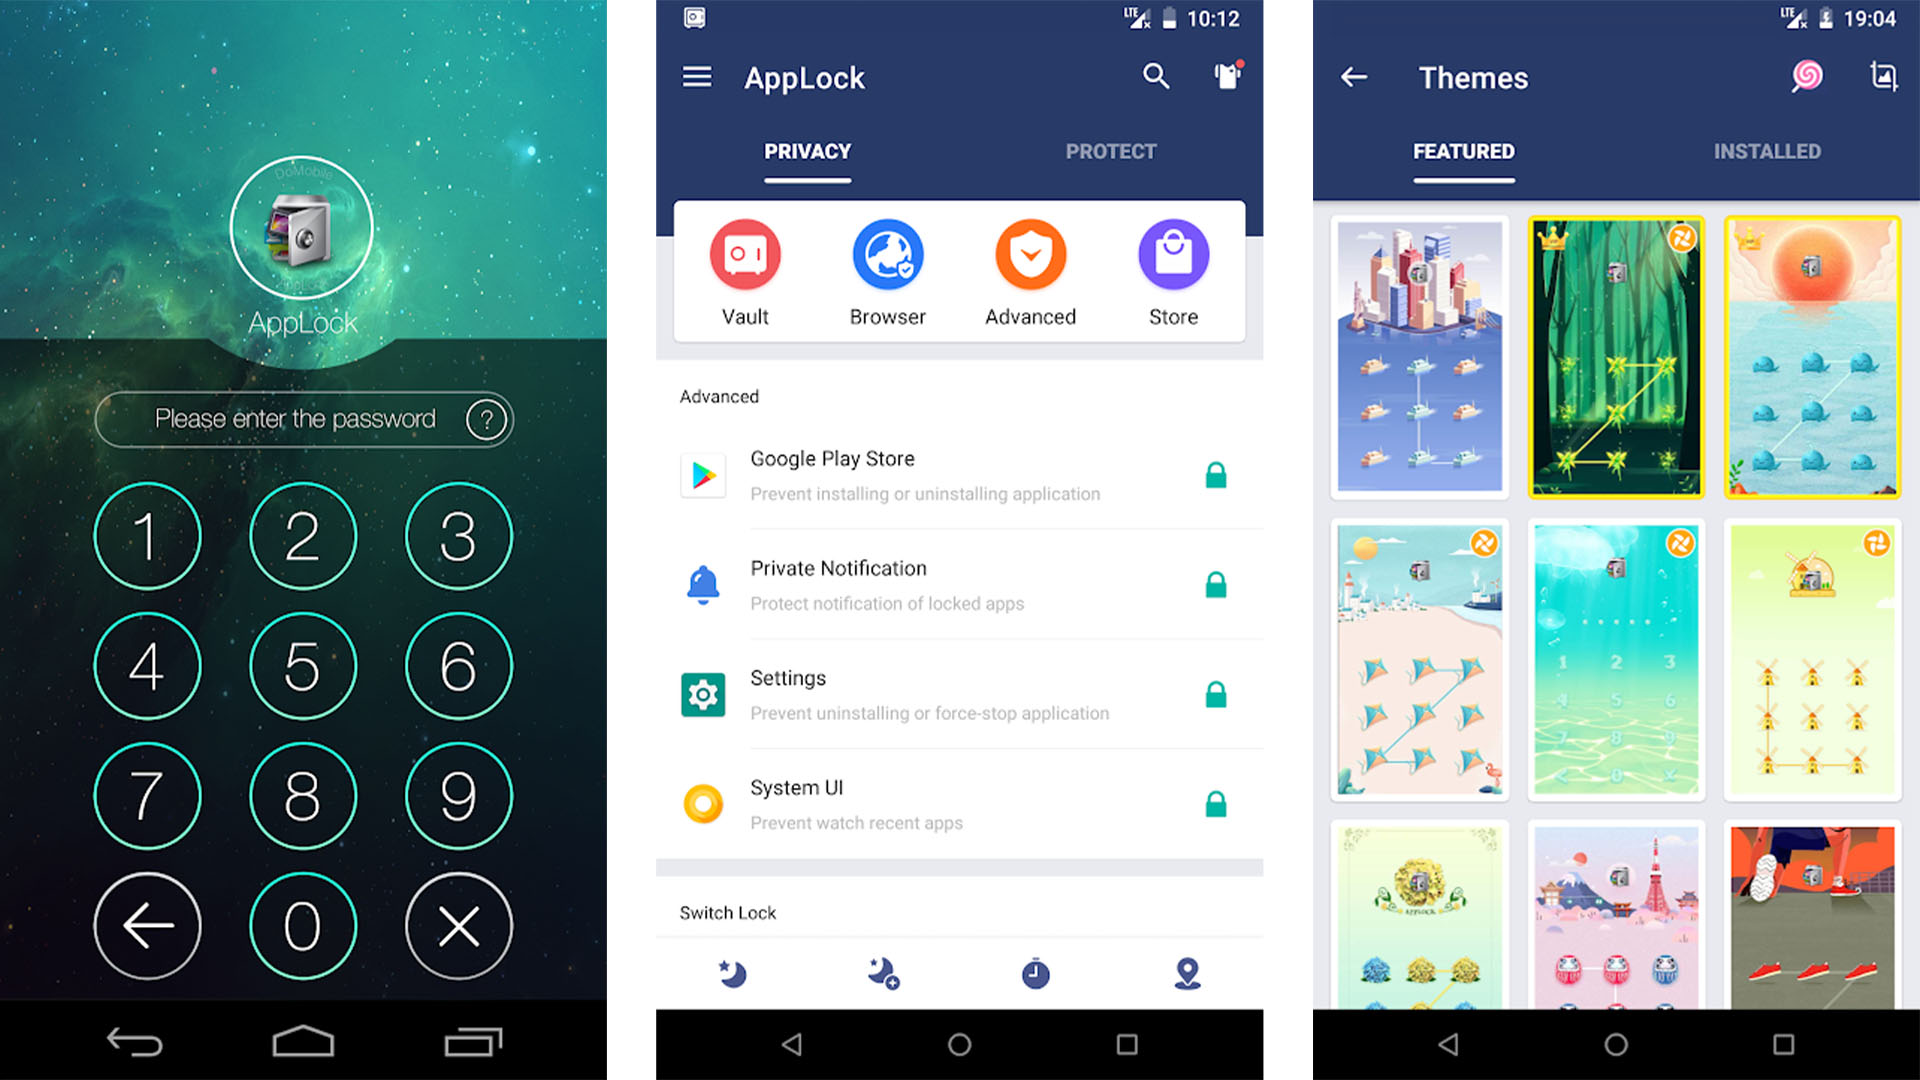 AppLock by DoMobile is one of the best security apps